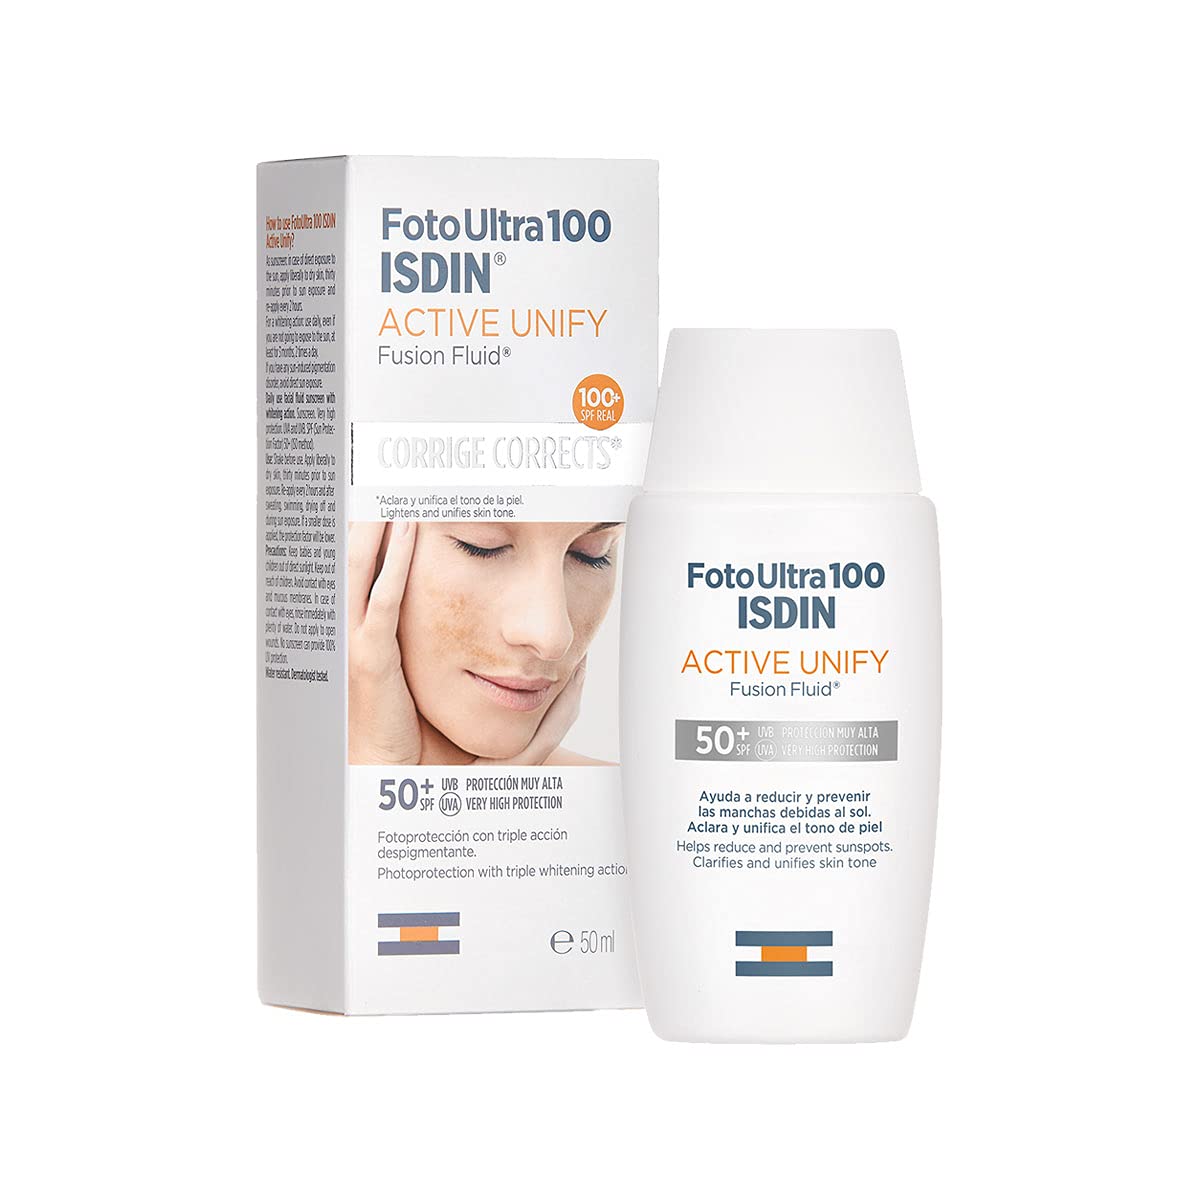 ISDIN Fotoultra 100 Active Unify Spf 50+ 50ml | Facial Sun Cream | Lightens and unifies skin tone